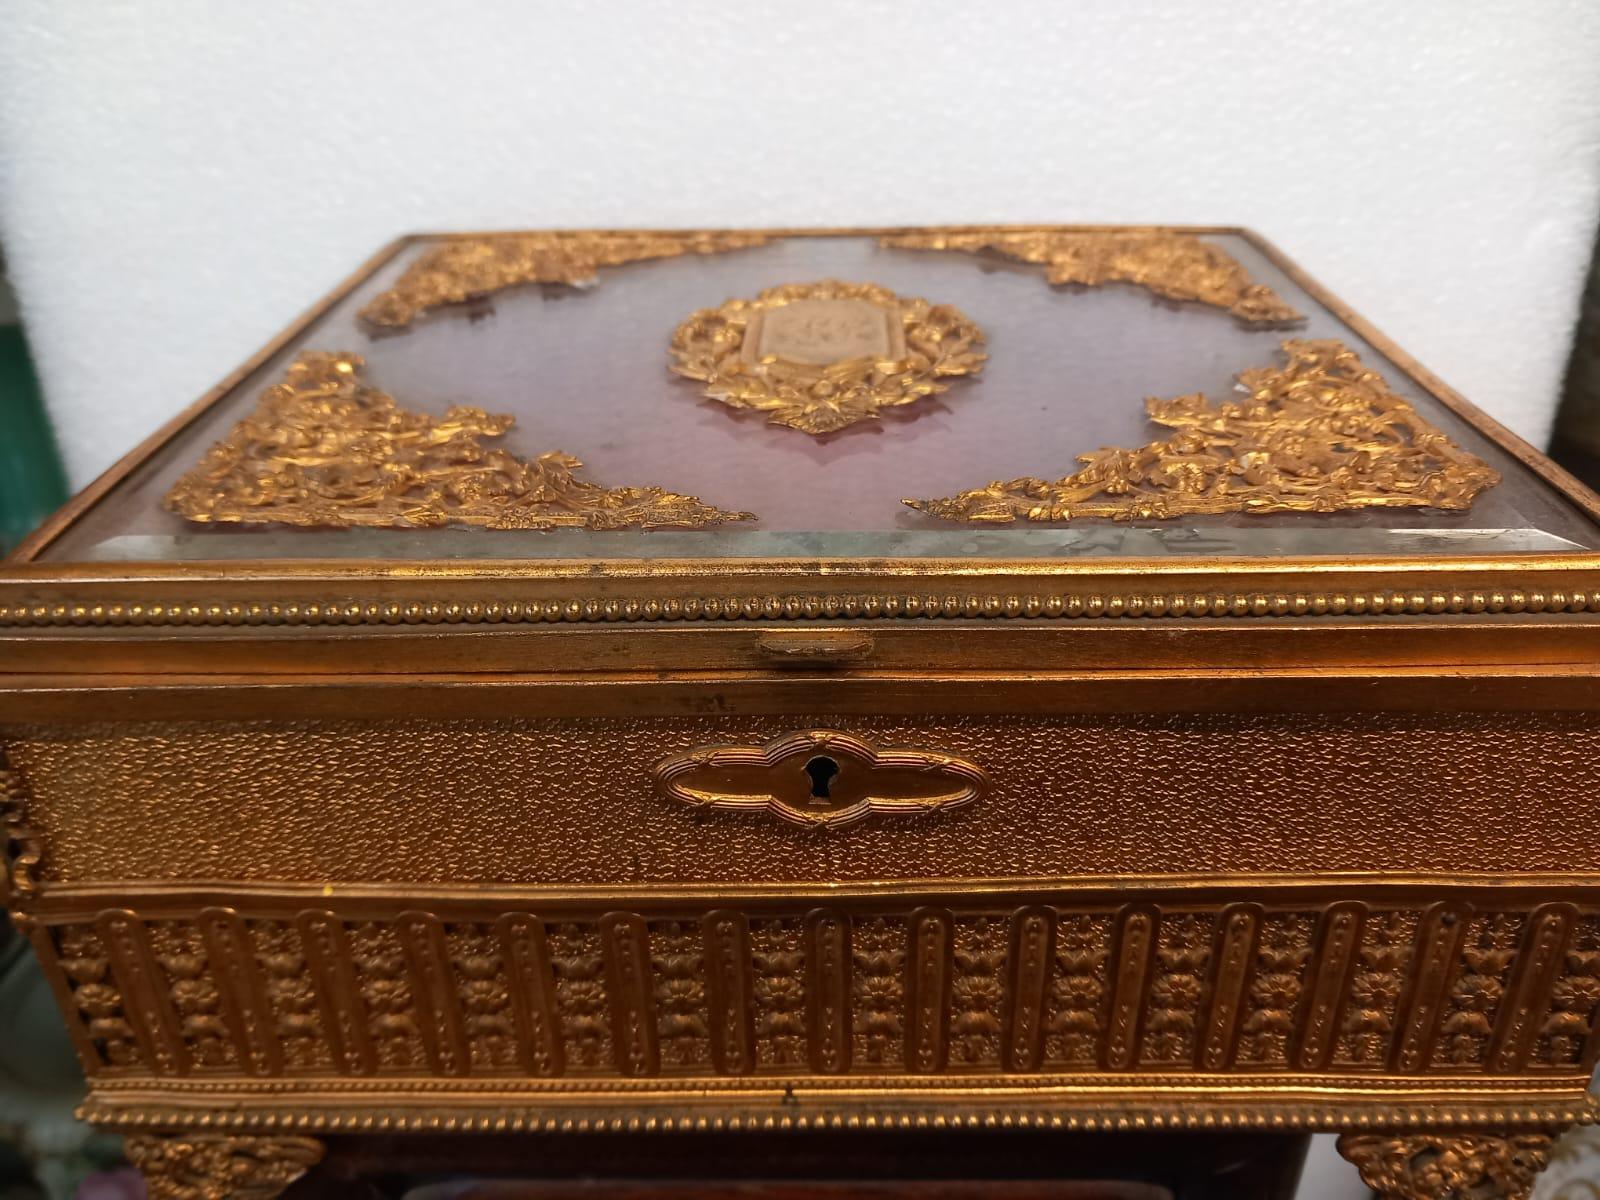 French Palais Royal gilt bronze and mother of pearl jewellery casket or trinket box For Sale